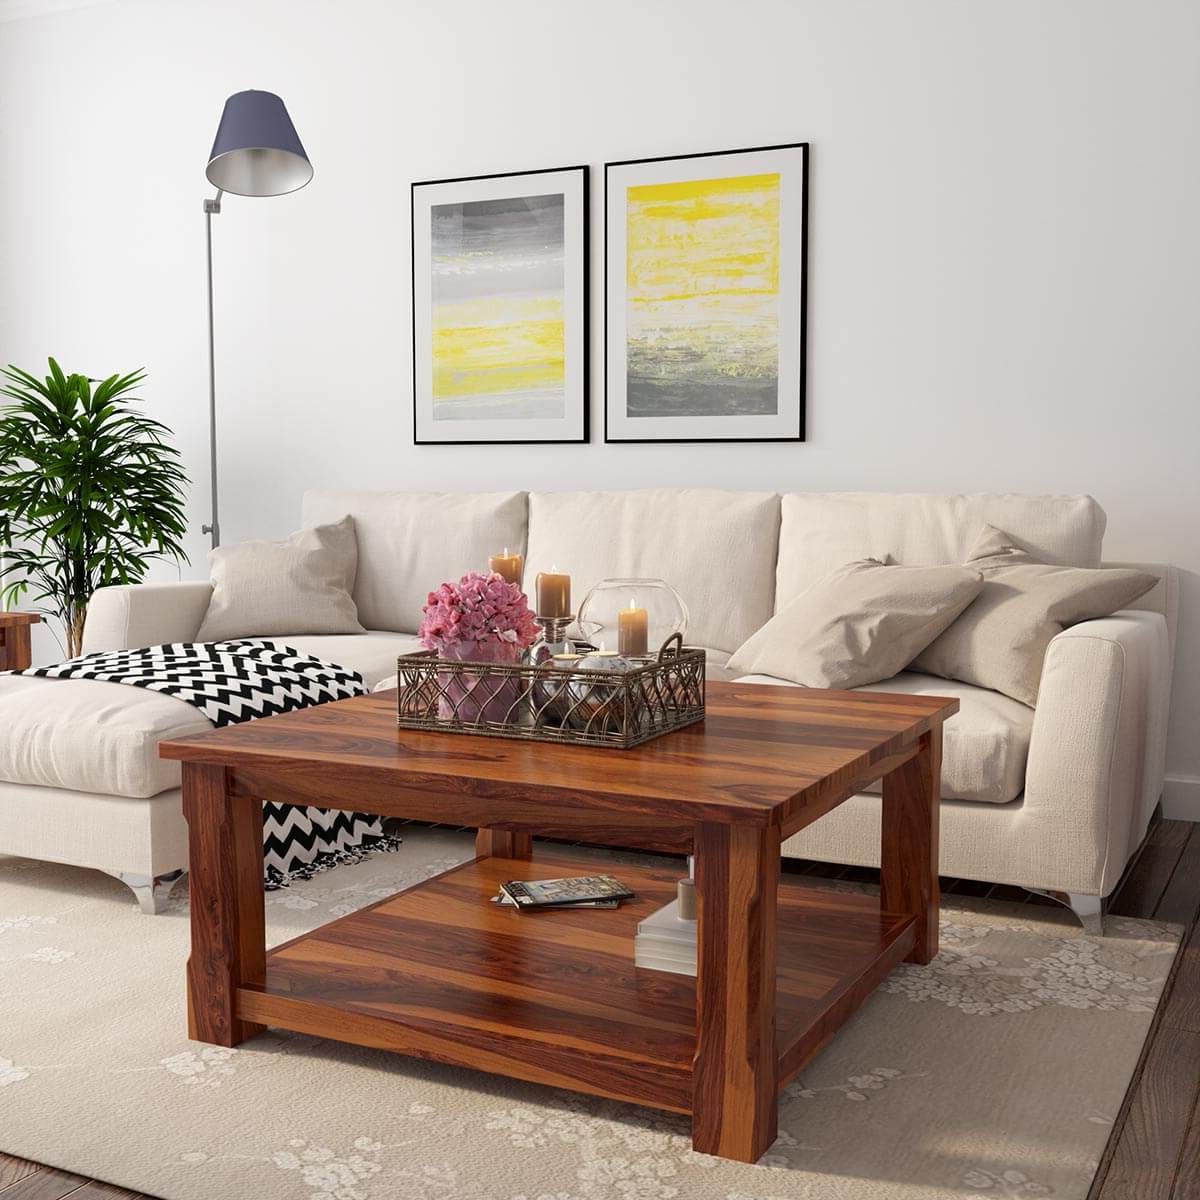 Latest Sierra Nevada 2 Tier Large Rustic Square Coffee Table Inside Large Modern Coffee Tables (View 7 of 10)